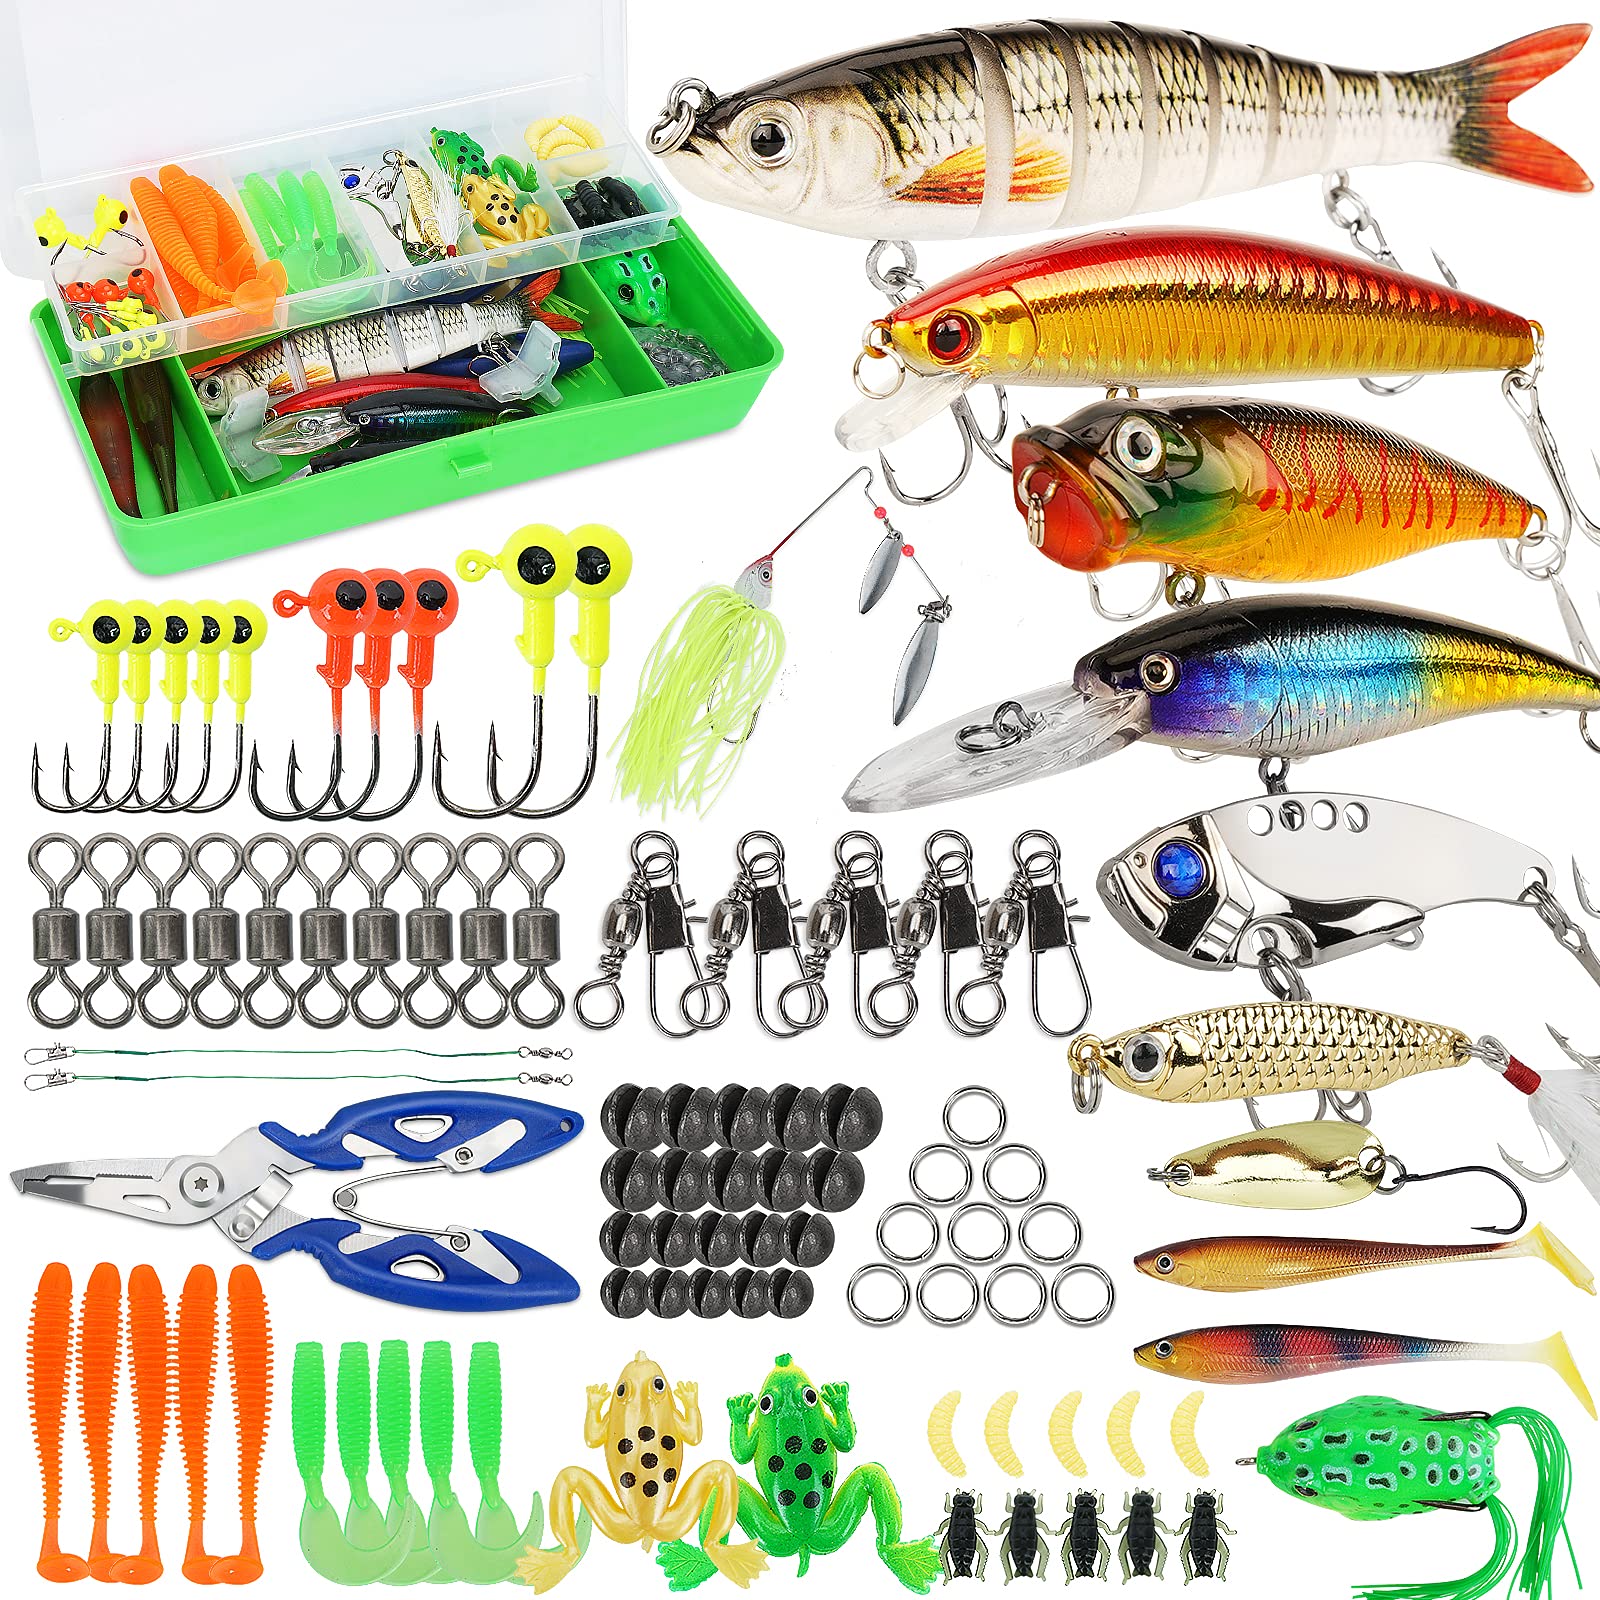 Wholesale fishing lure retail box To Store Your Fishing Gear 